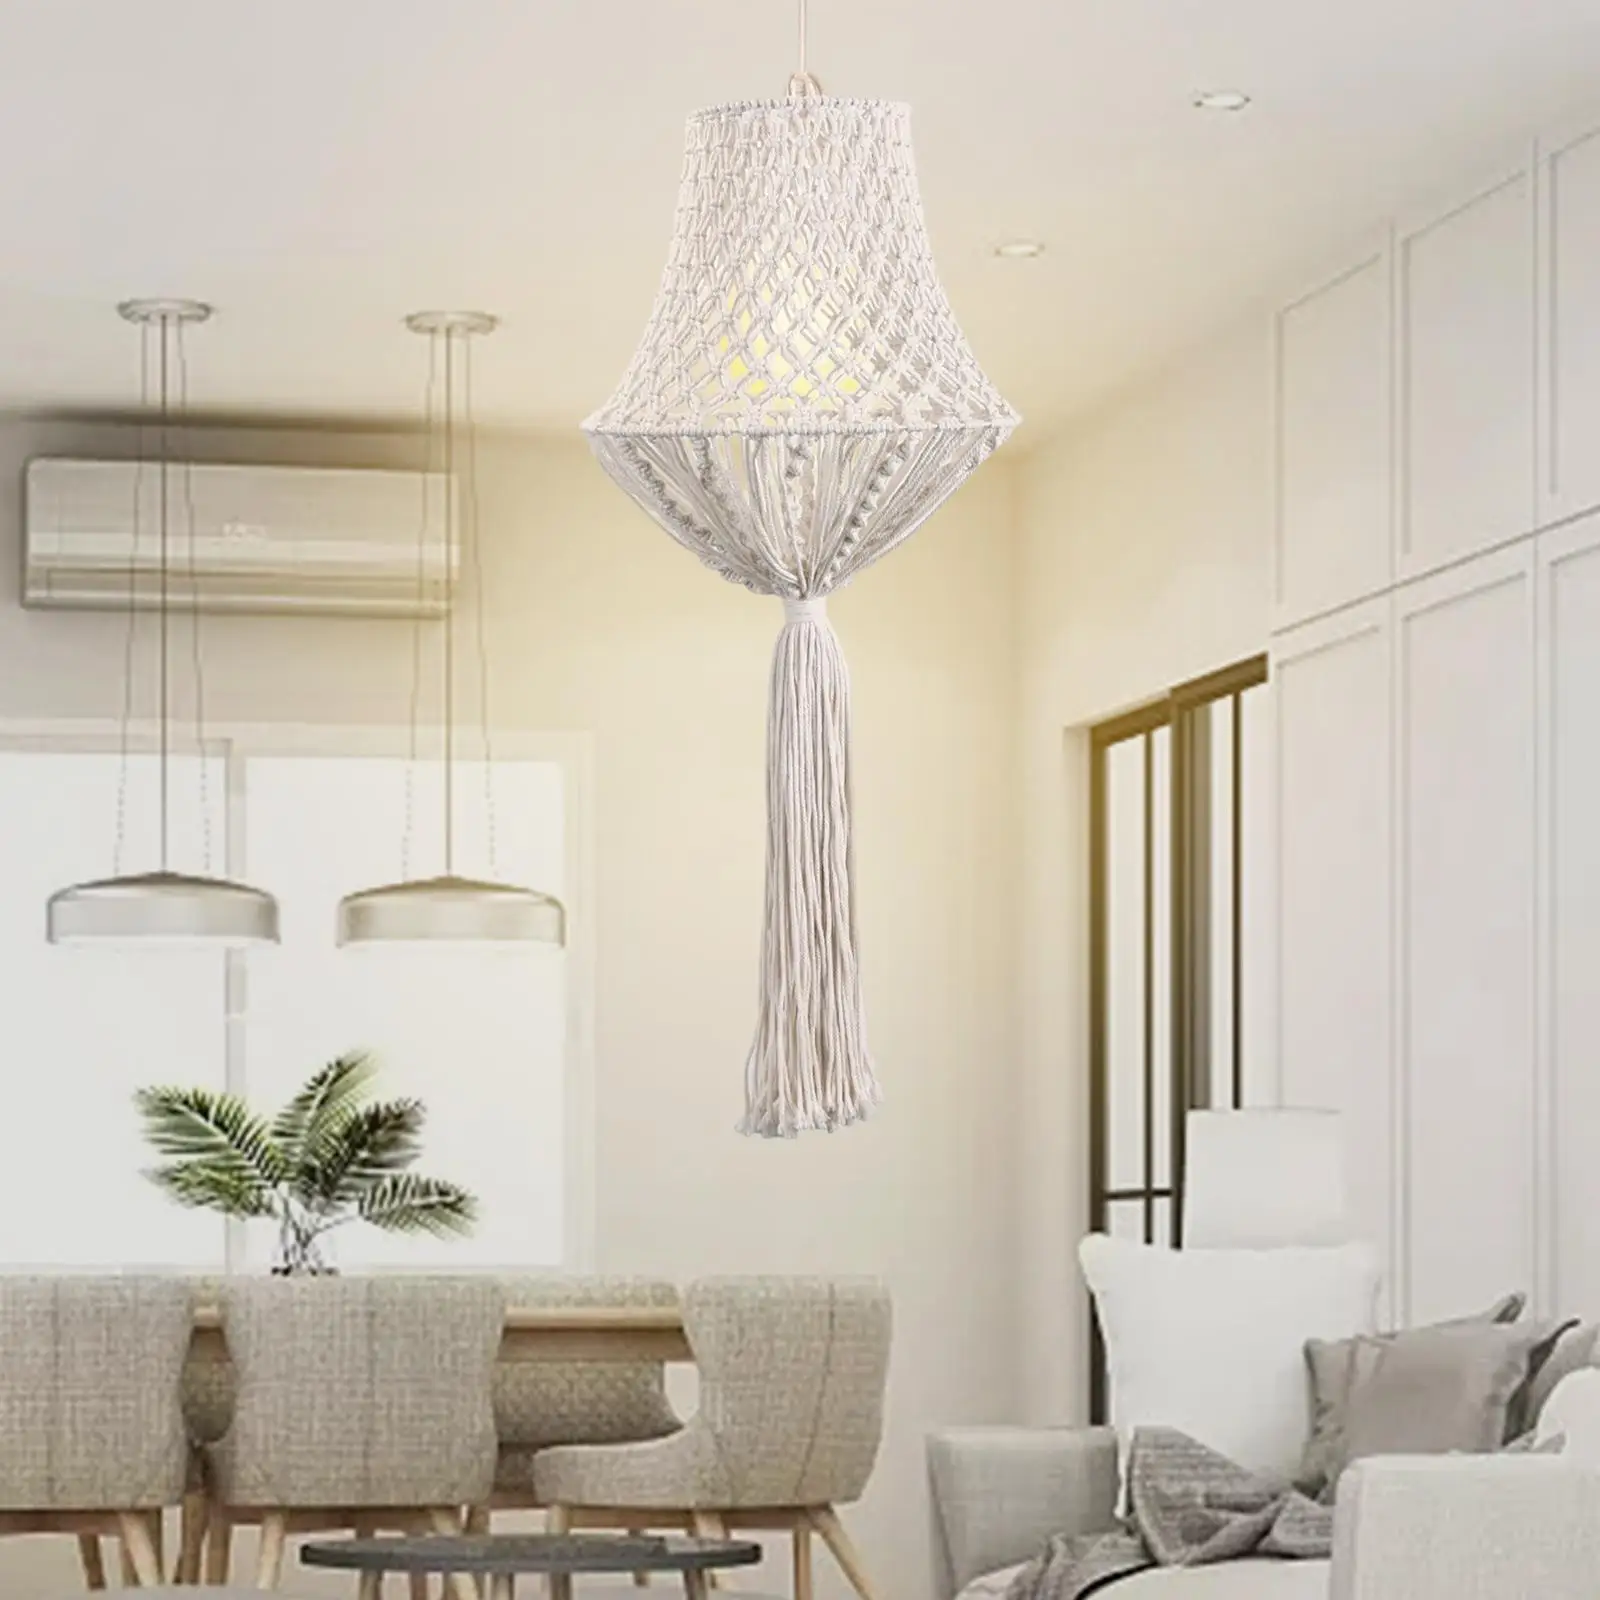 Rural Style Macrame Lamp Shade Handmade Weaving Ceiling Light Shade Fitting Chandelier Lampshade for Living Room Home Decoration